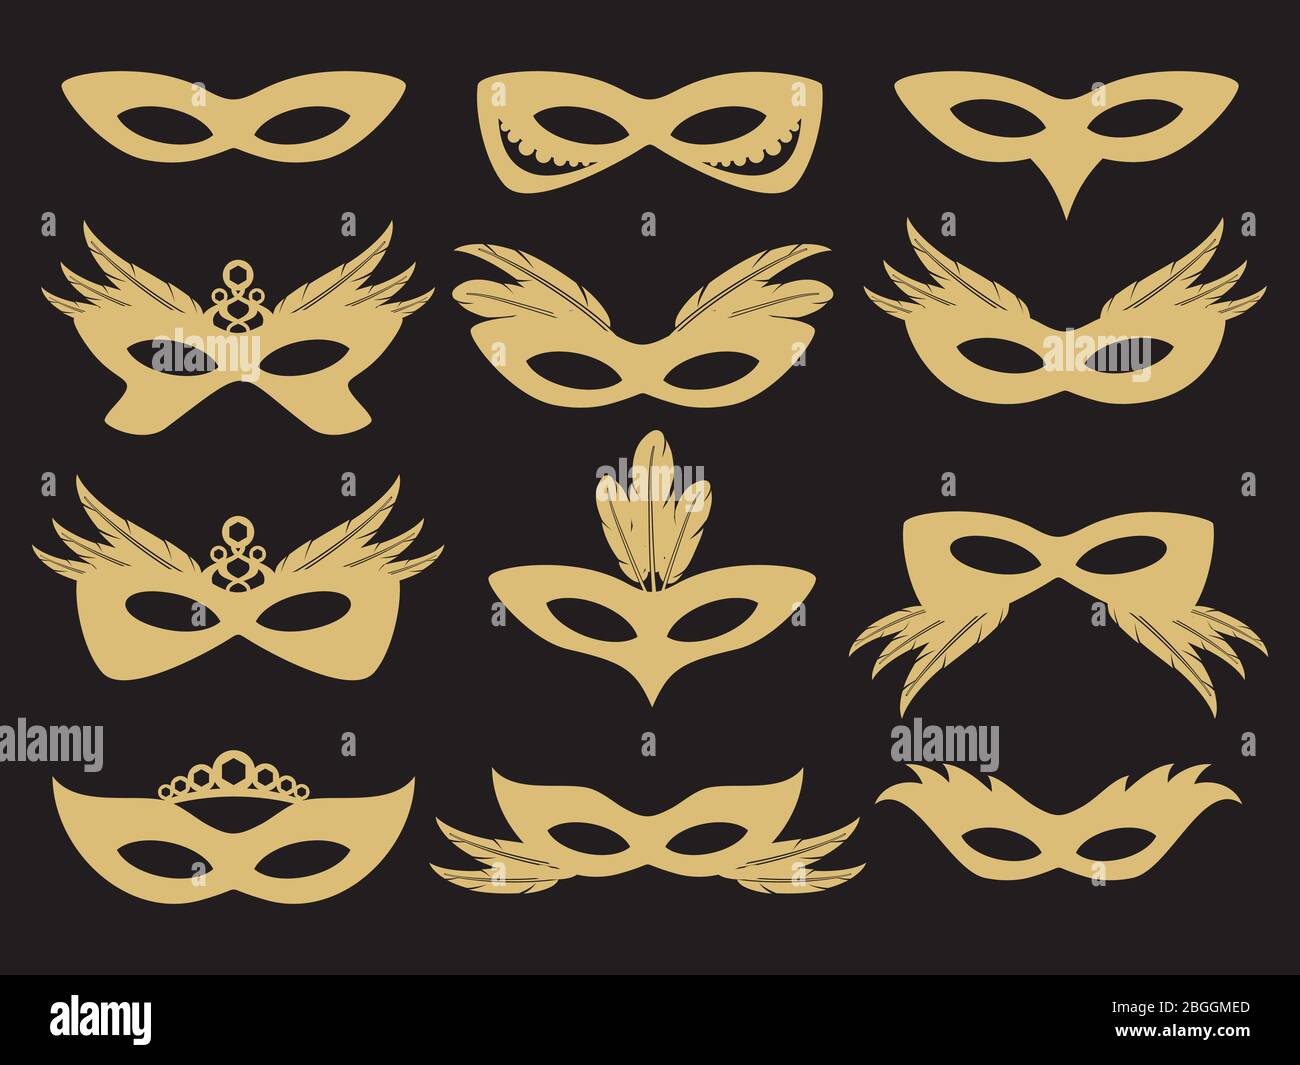 Gold carnival party face masks with decorative elements on black background. Vector illustration Stock Vector